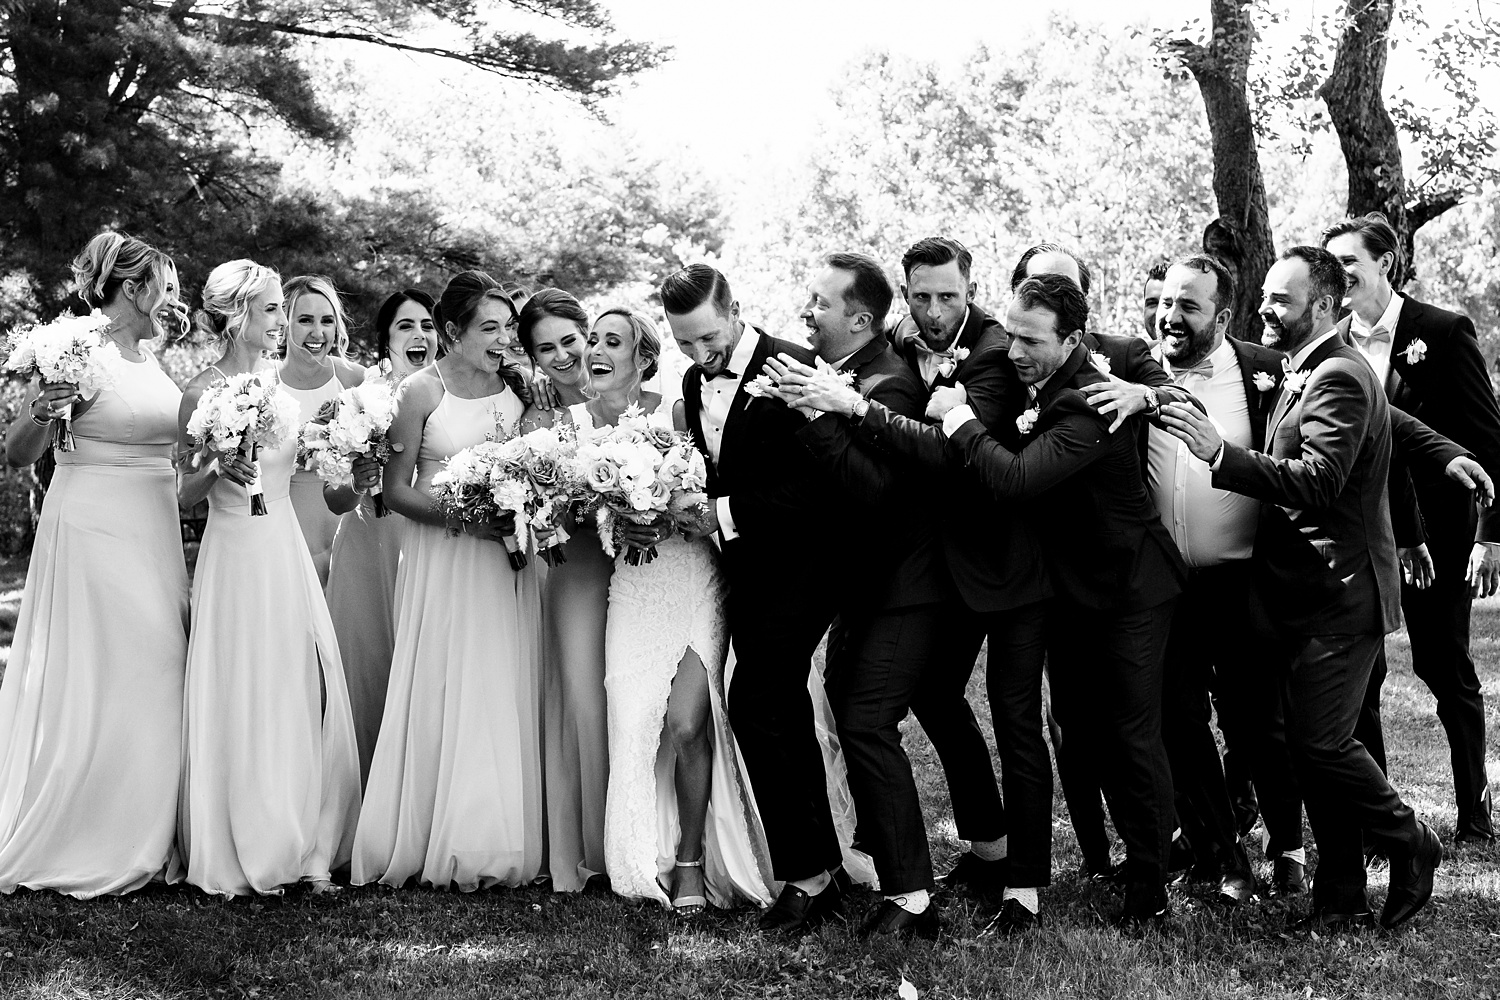 The wedding party shows some love for the newlyweds after the ceremony